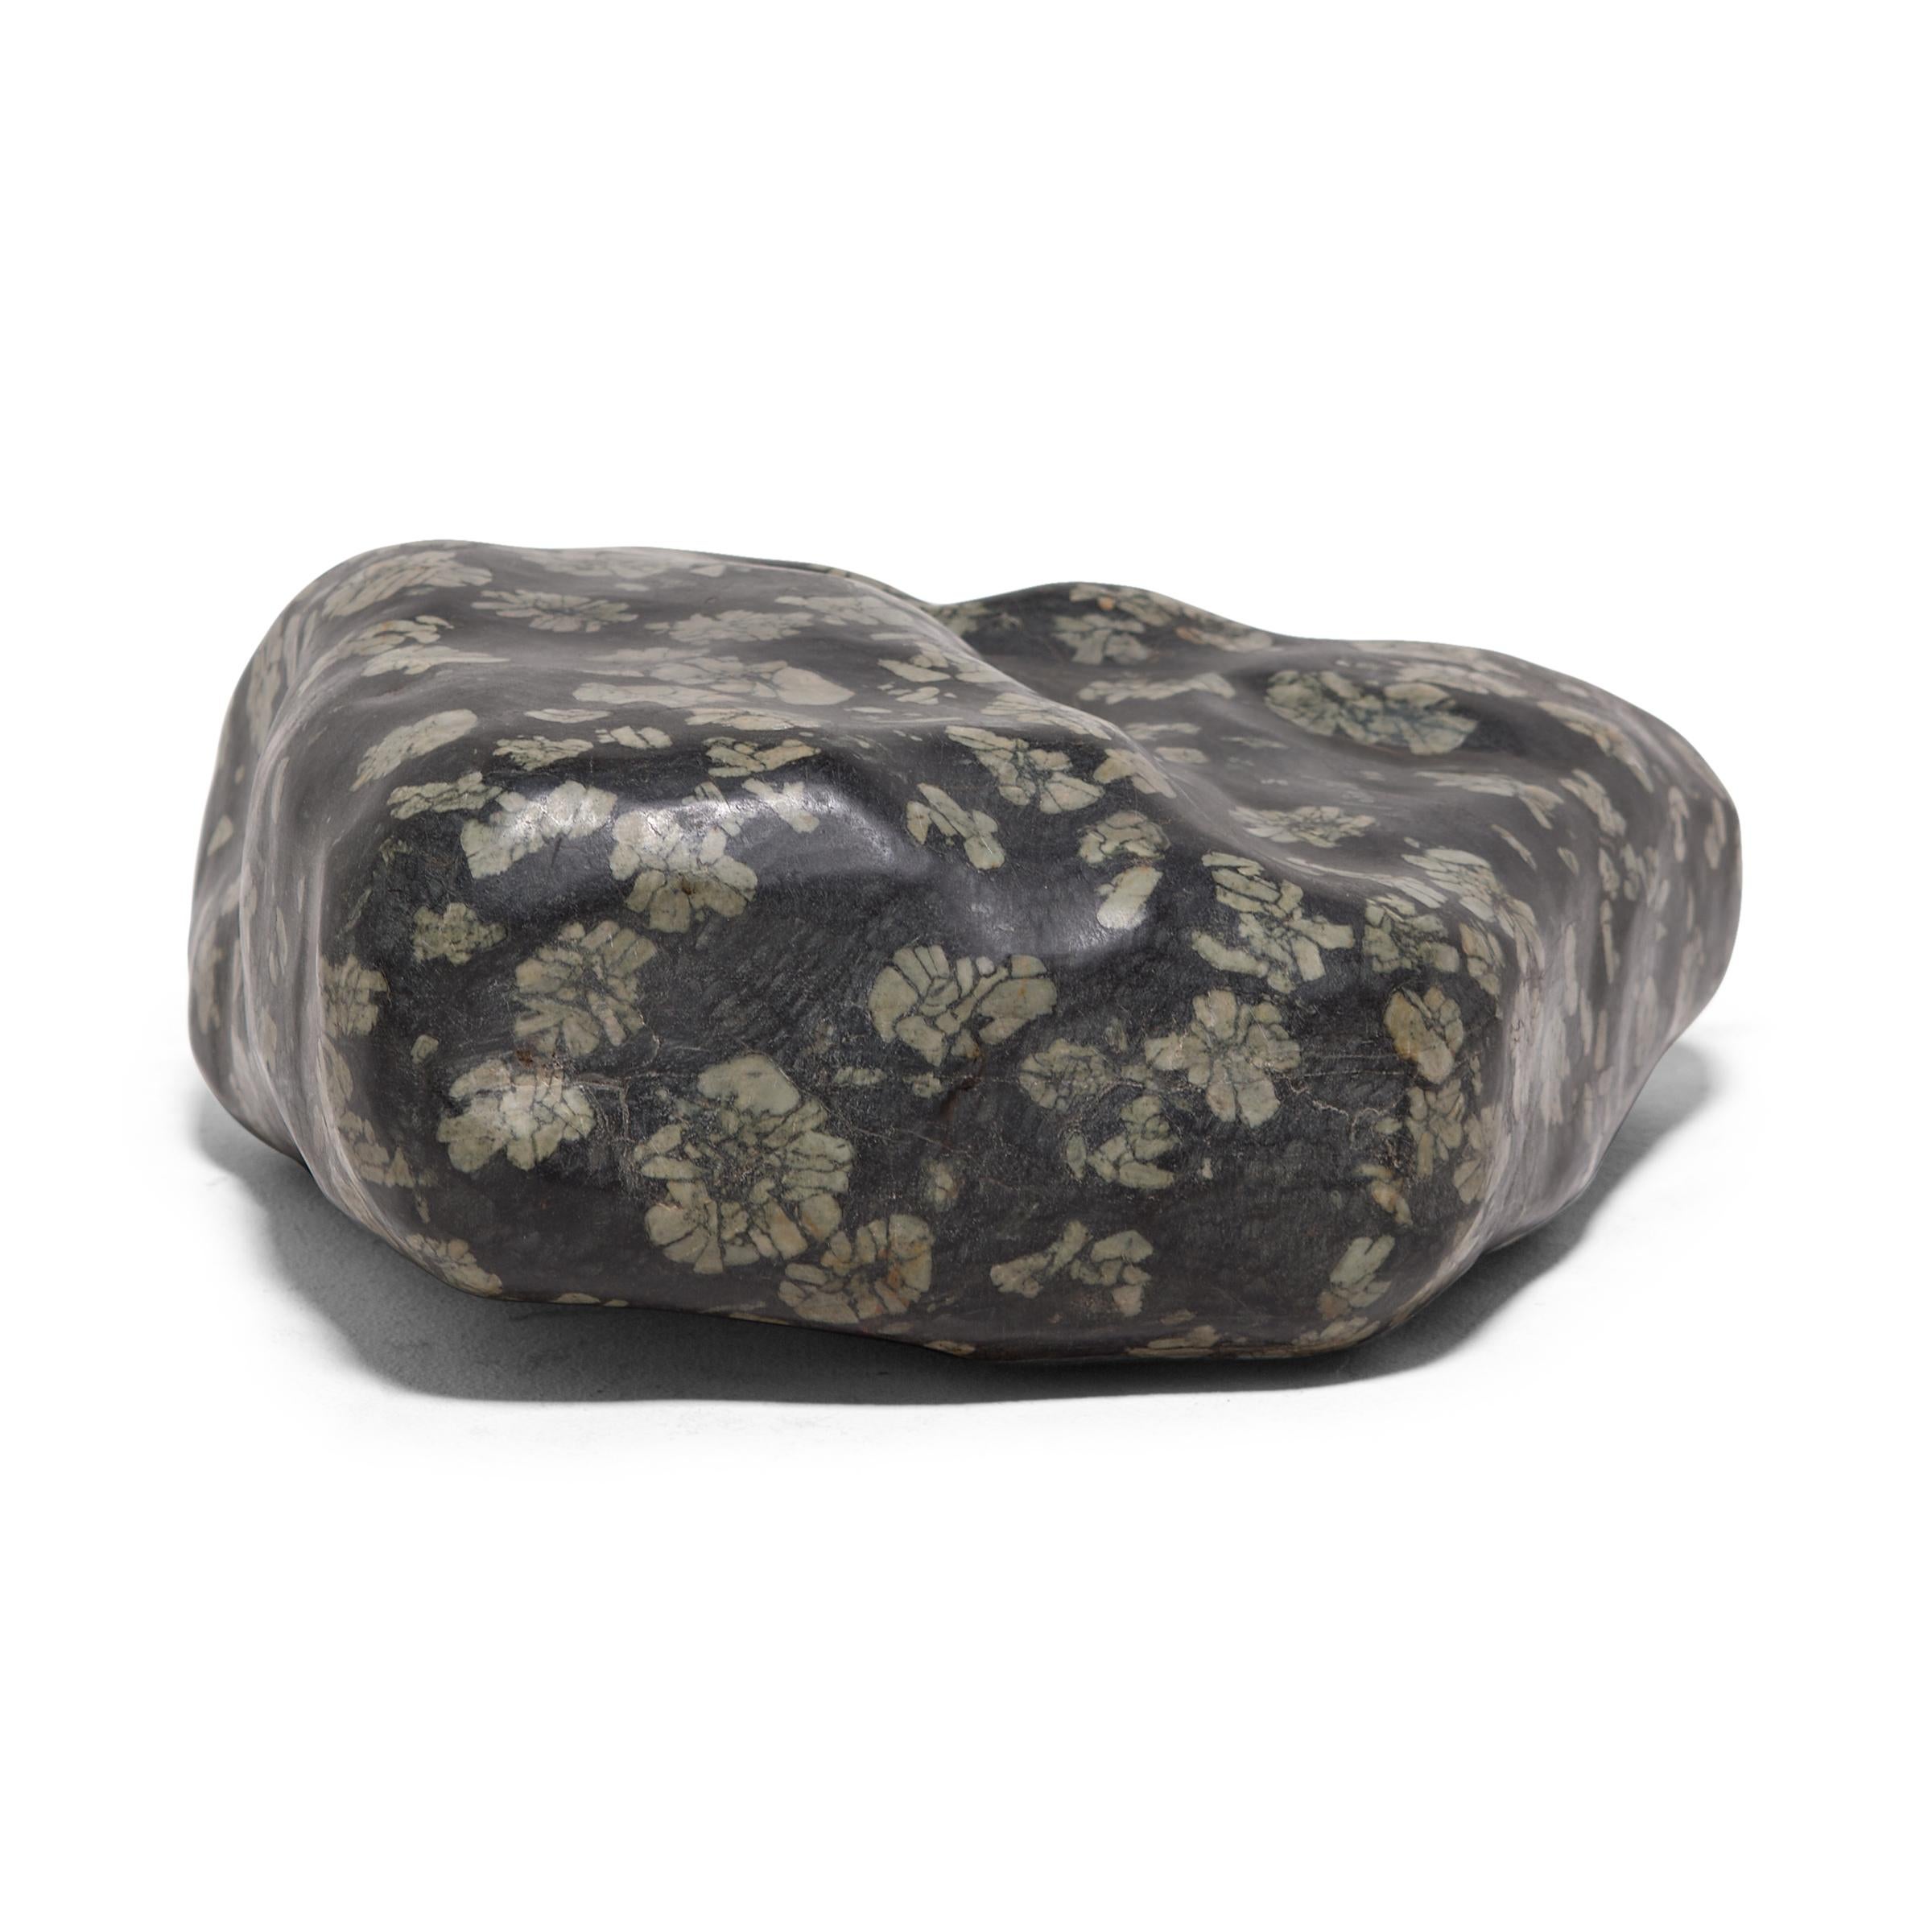 Sourced from Henan province, this amazing stone looks as if it were sprinkled with a flurry of peony blossoms, the result of flower-like aggregates of lighter-colored feldspar incorporated into the stone’s dark, fine-grained ground. Polished silky